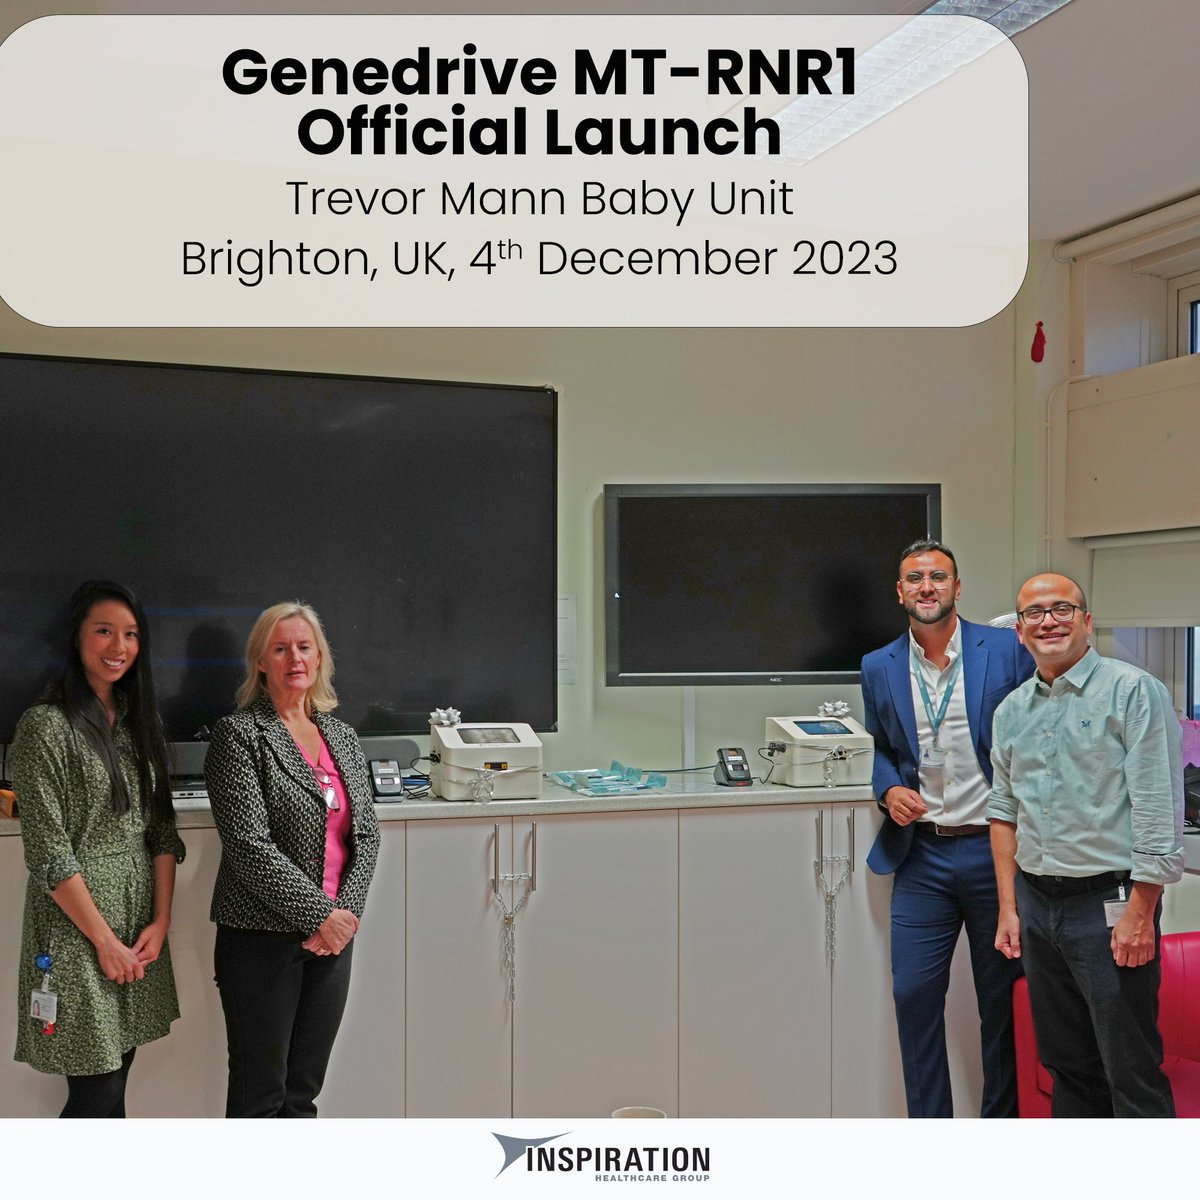 We are delighted to announce the launch of the Genedrive MT-RNR1 test at the Royal Sussex County Hospital in Brighton.

Keep a look out for some more photos of the launch event in the coming days!

#WeAreInspiration #genedrive